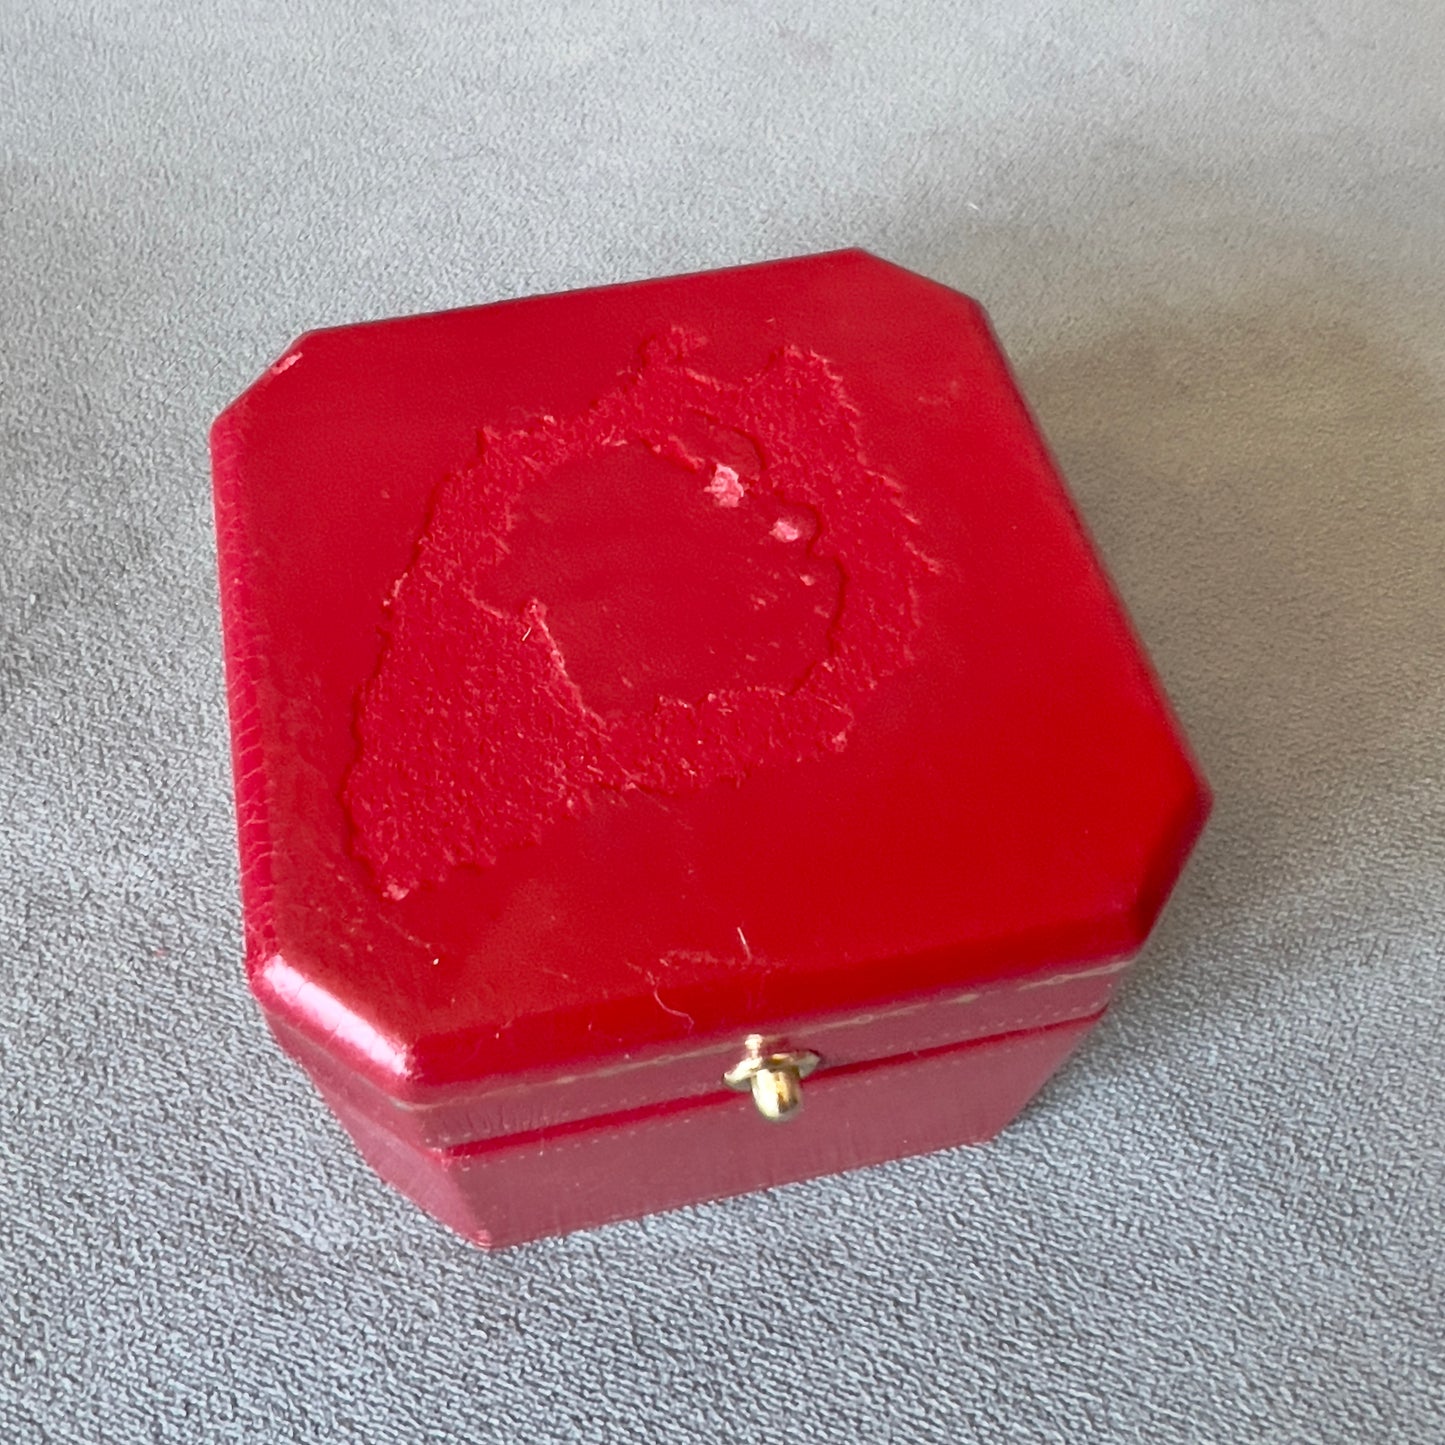 CARTIER Ring Box + Outer Box 3.10x3x2.30 inches